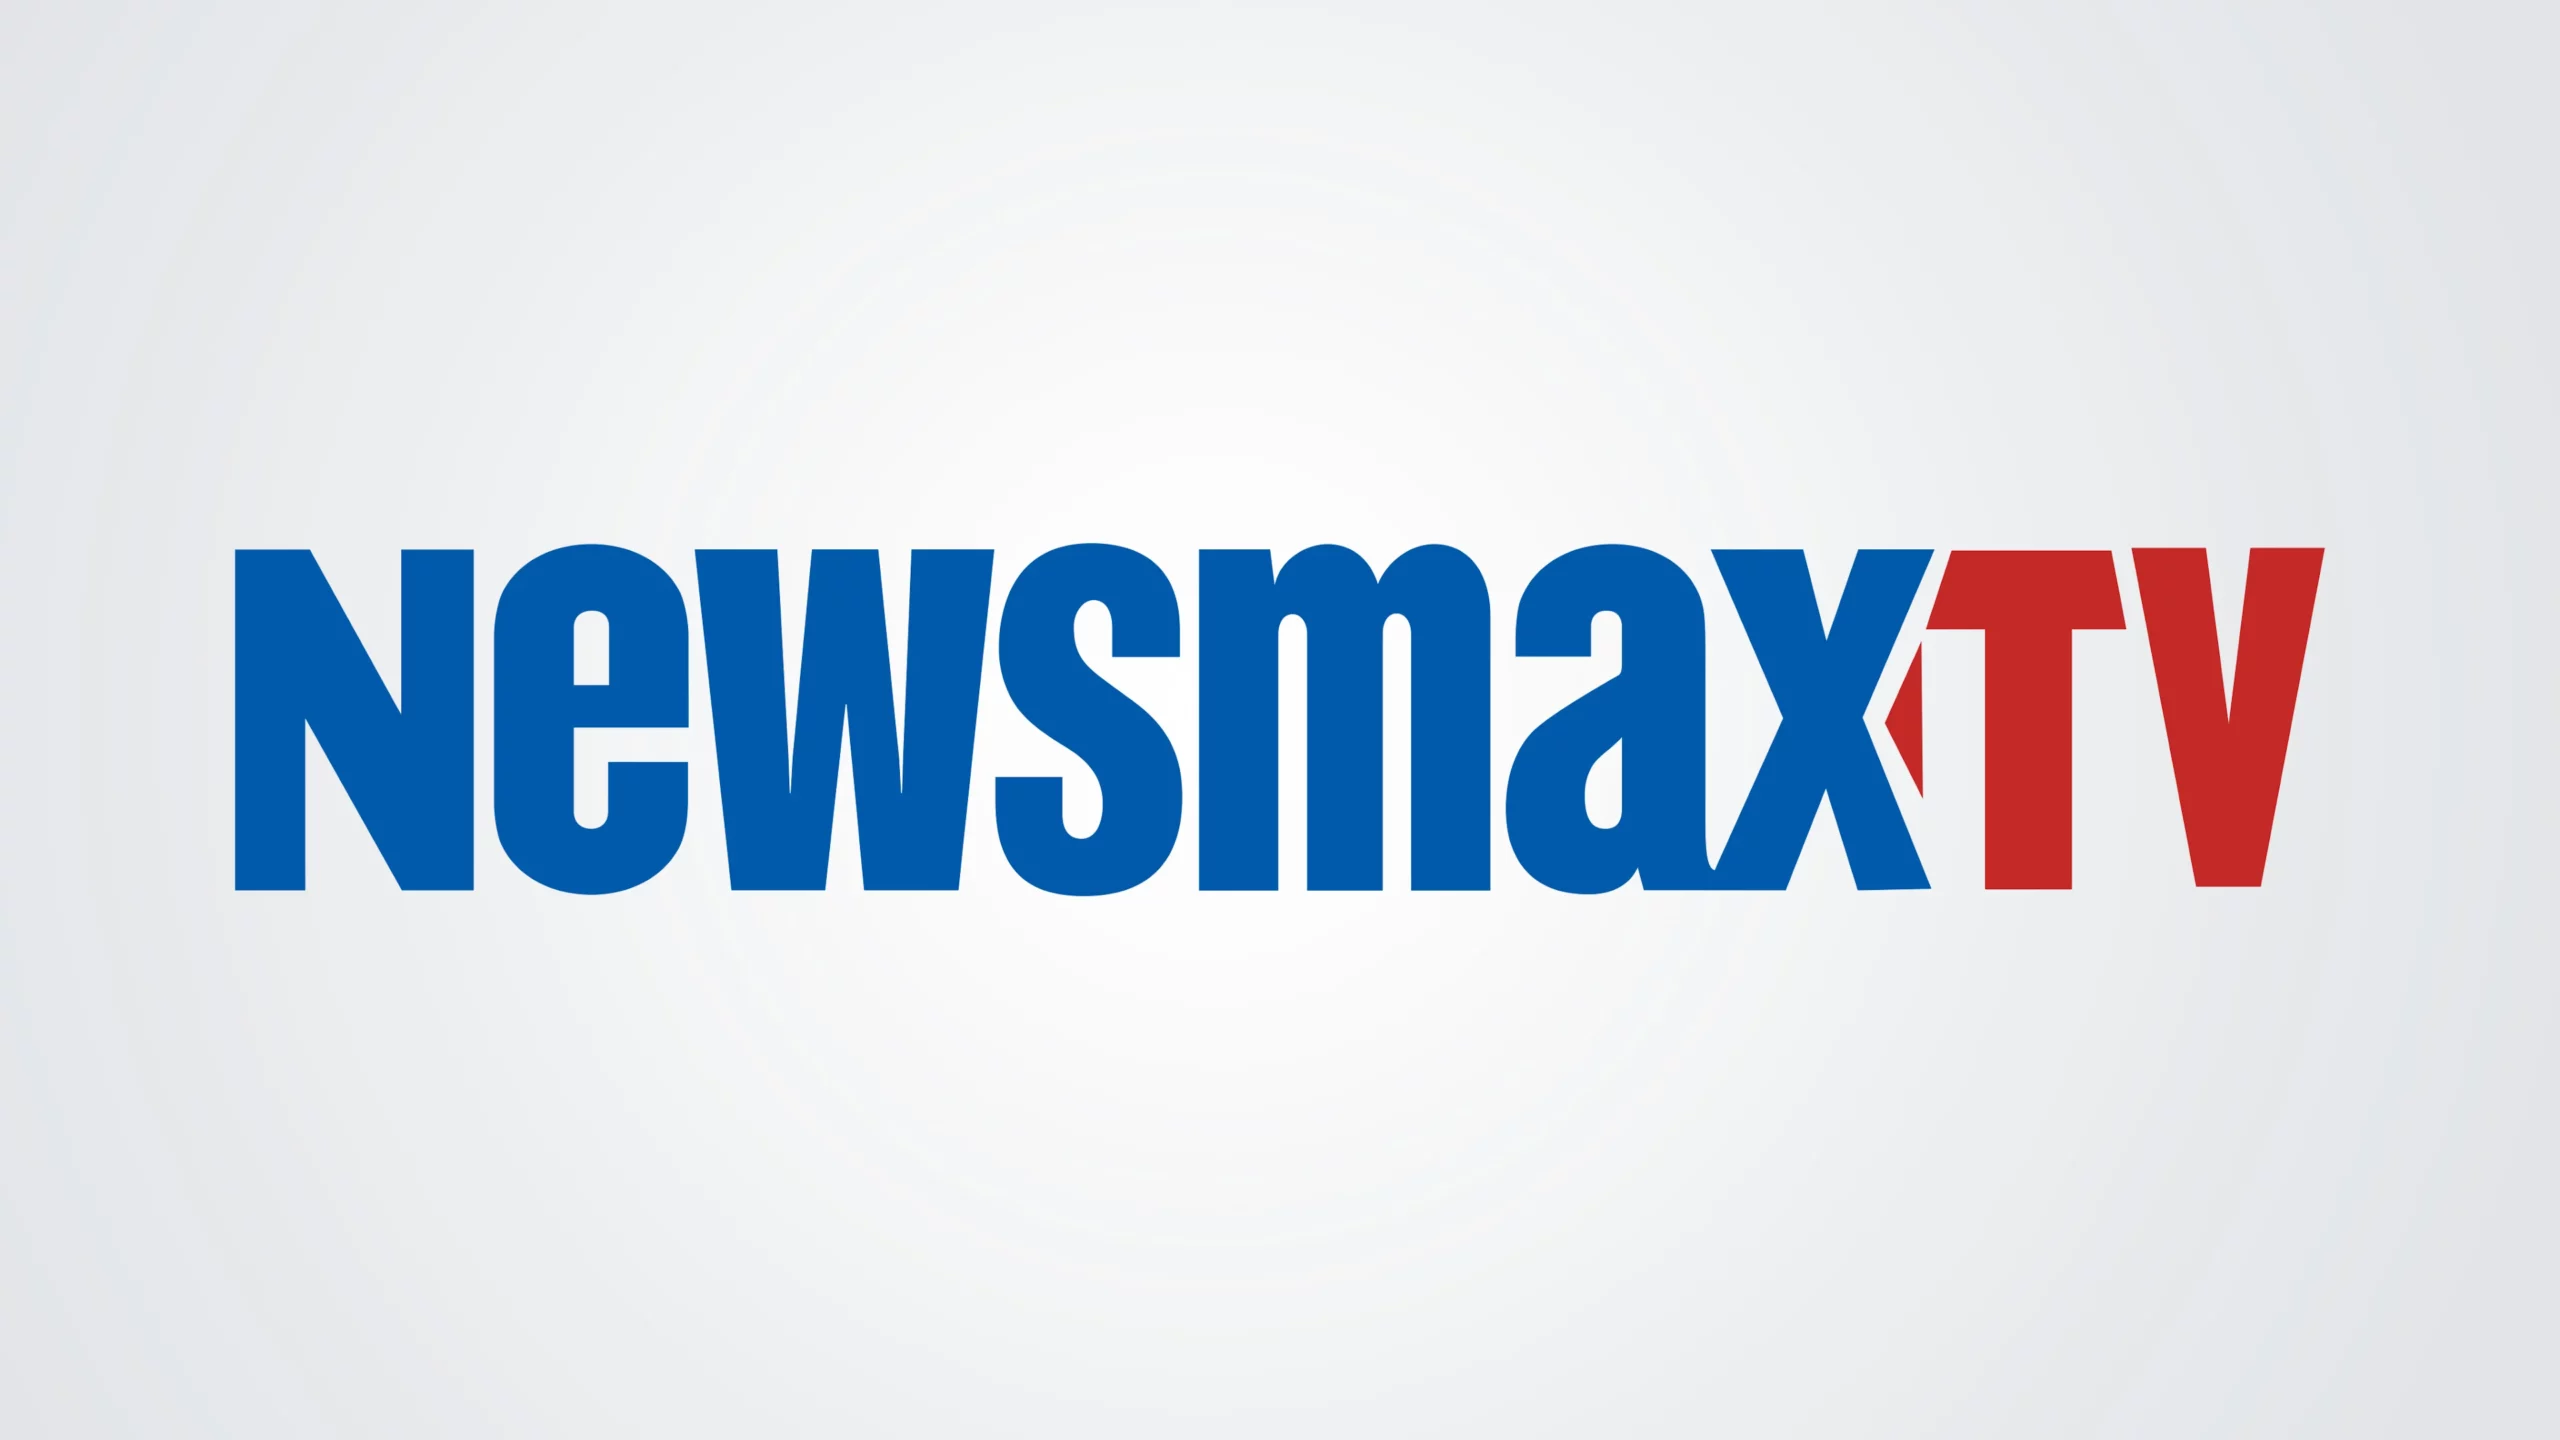 Image of the Newsmax TV logo.